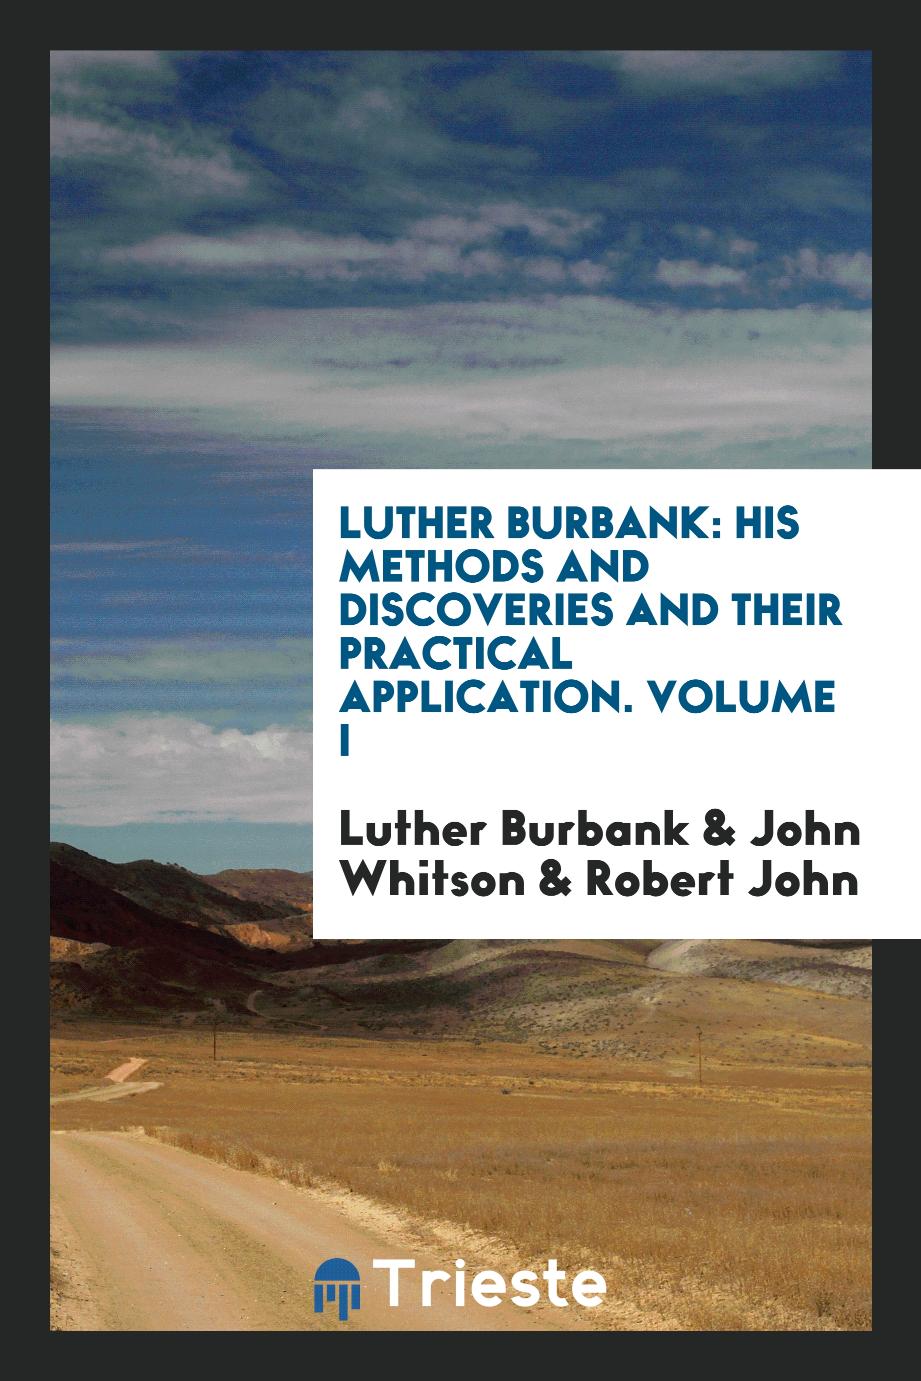 Luther Burbank: His Methods and Discoveries and Their Practical Application. Volume I